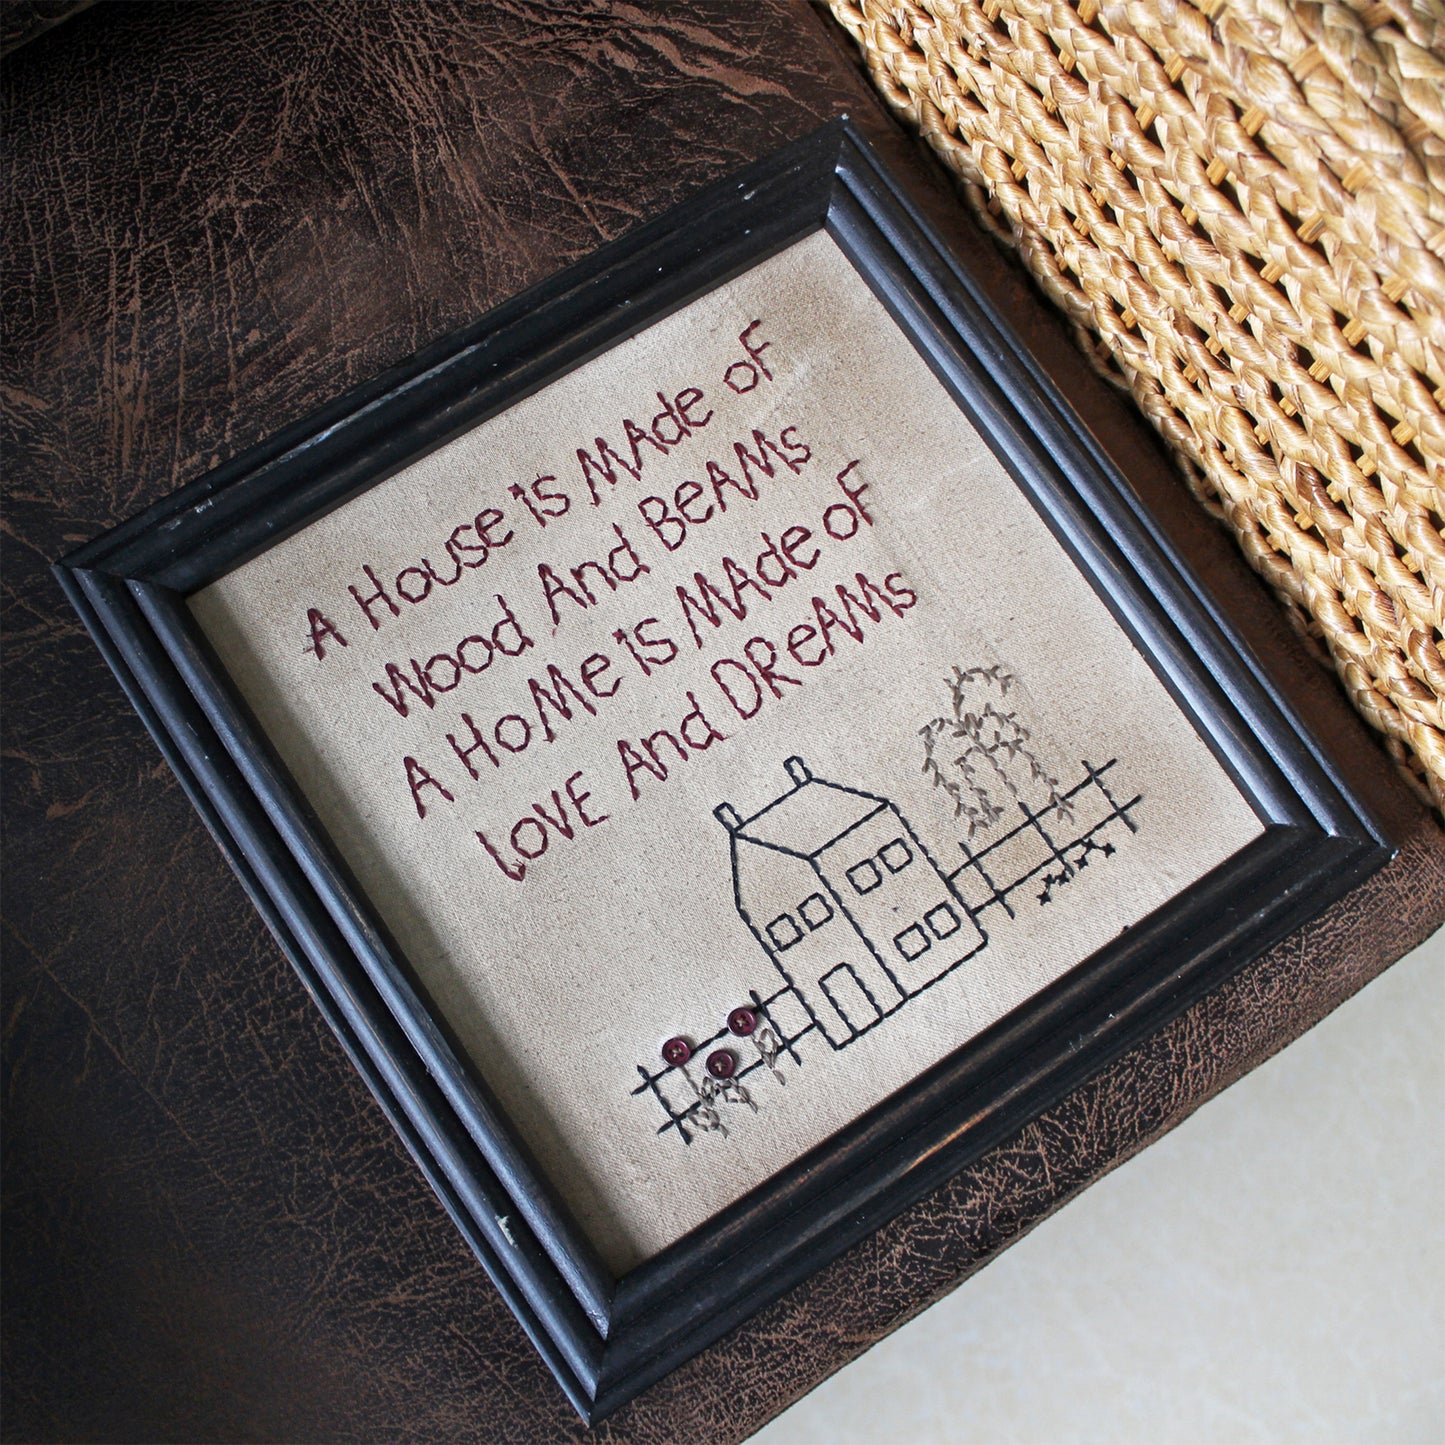 CVHOMEDECO. Primitives Antique A House is Made of Wood and Beams, A Home is Made of Love and Dreams Stitchery Frame Wall Mounted Hanging Decor Art, 12 x 12 Inch